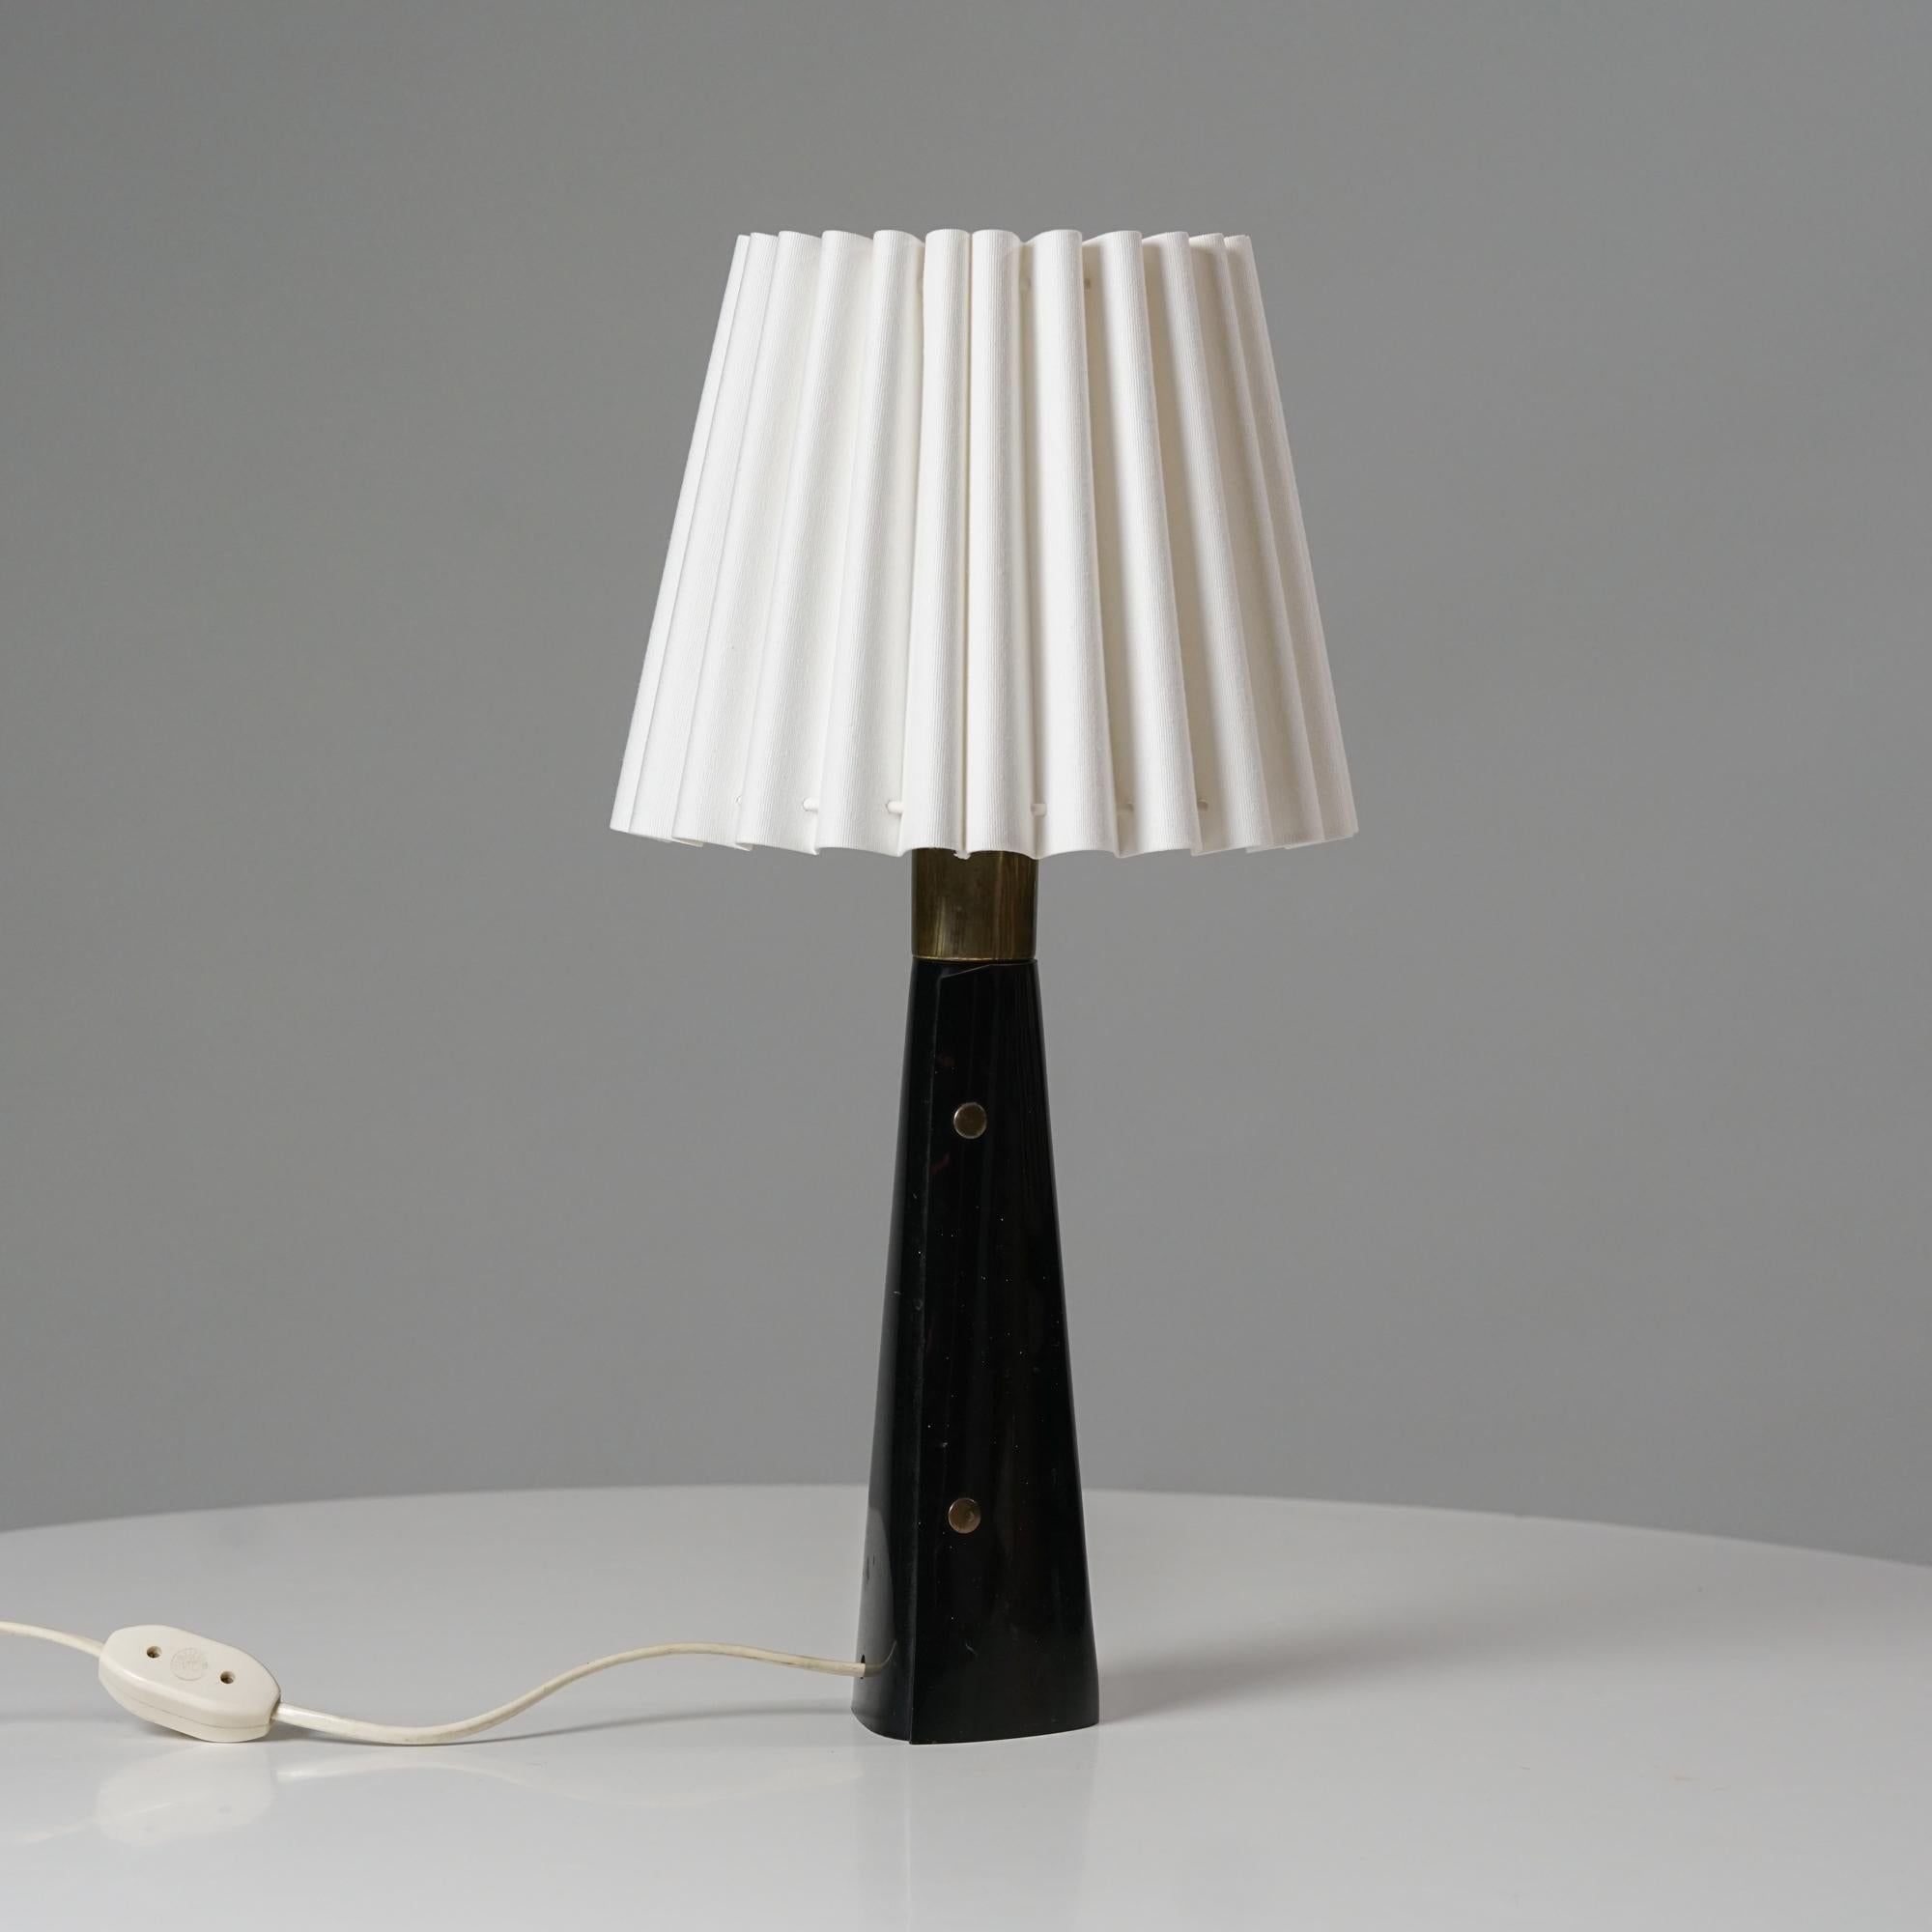 Table lamp by Lisa Johansson-Pape for Sanka Oy Finland from the 1960s. Acrylic, brass, cotton lampshade. Good vintage condition, minor patina and wear consistent with age and use. Iconic and timeless Lisa Johansson-Pape design. 